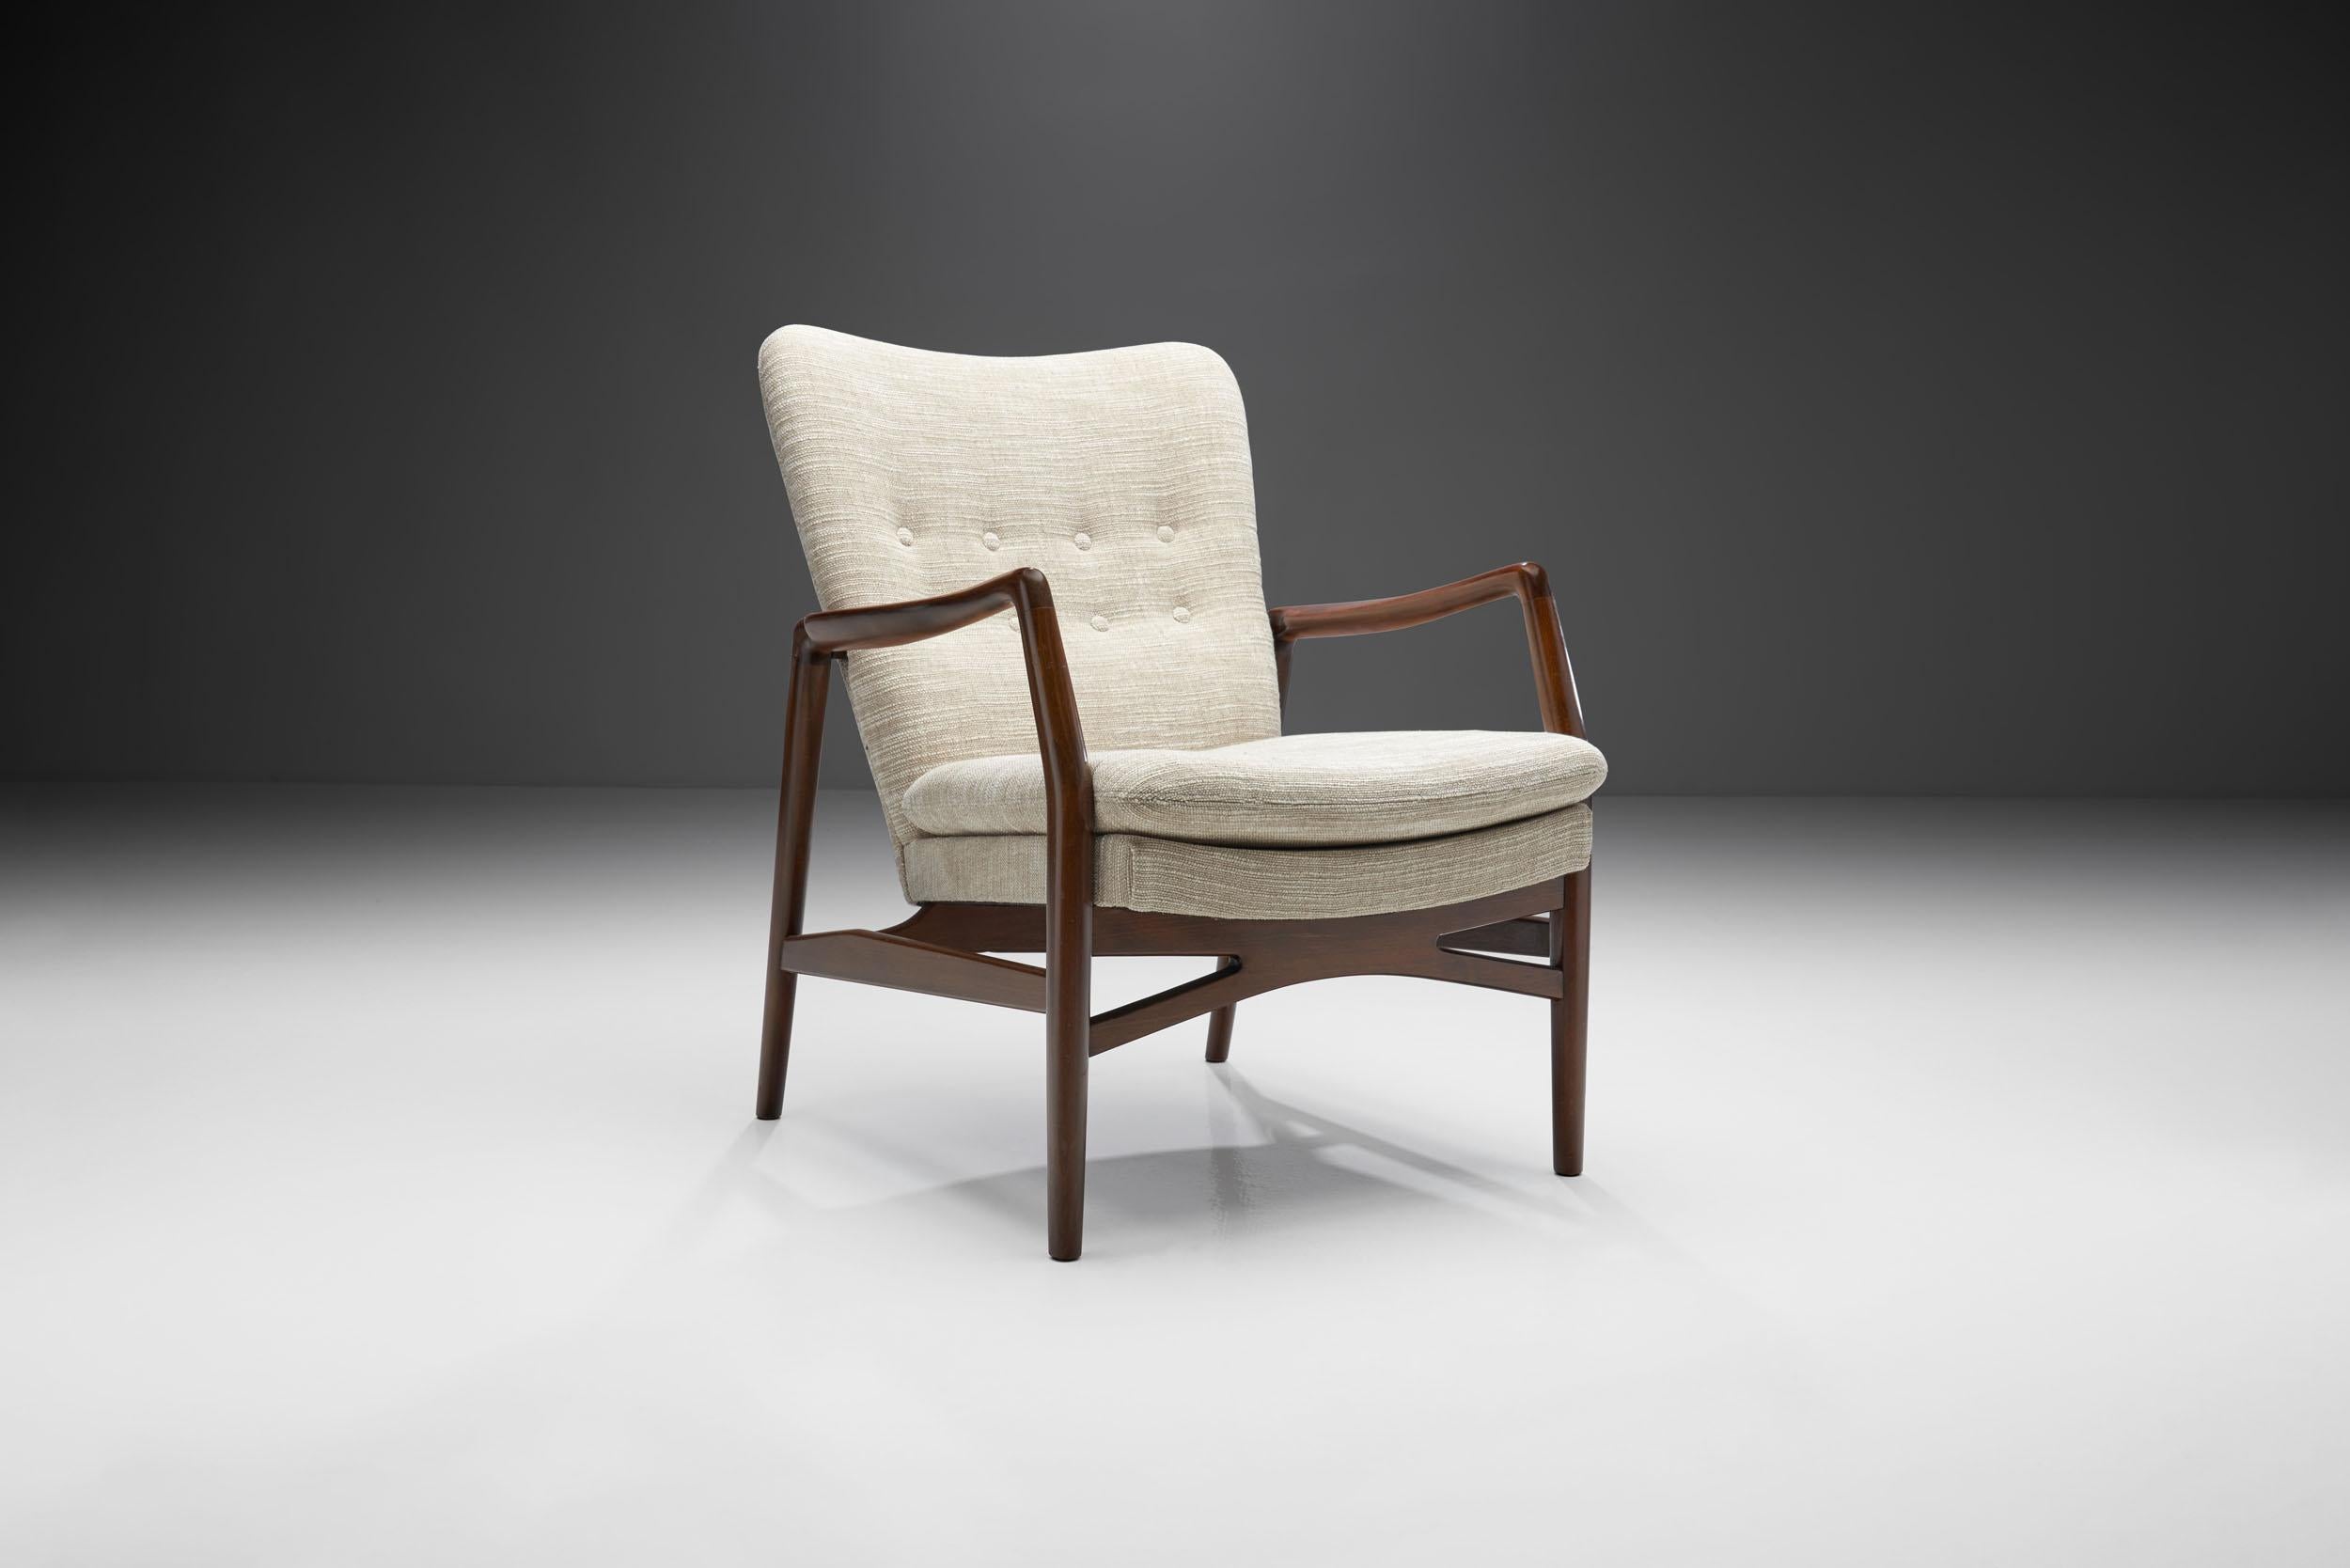 This “Model 215” easy chair was designed by Danish designer and architect Kurt Olsen, and unifies some of the best characteristics of mid-century Danish design and craftsmanship.

The unique design of this chair is in big part thanks to Olsen’s